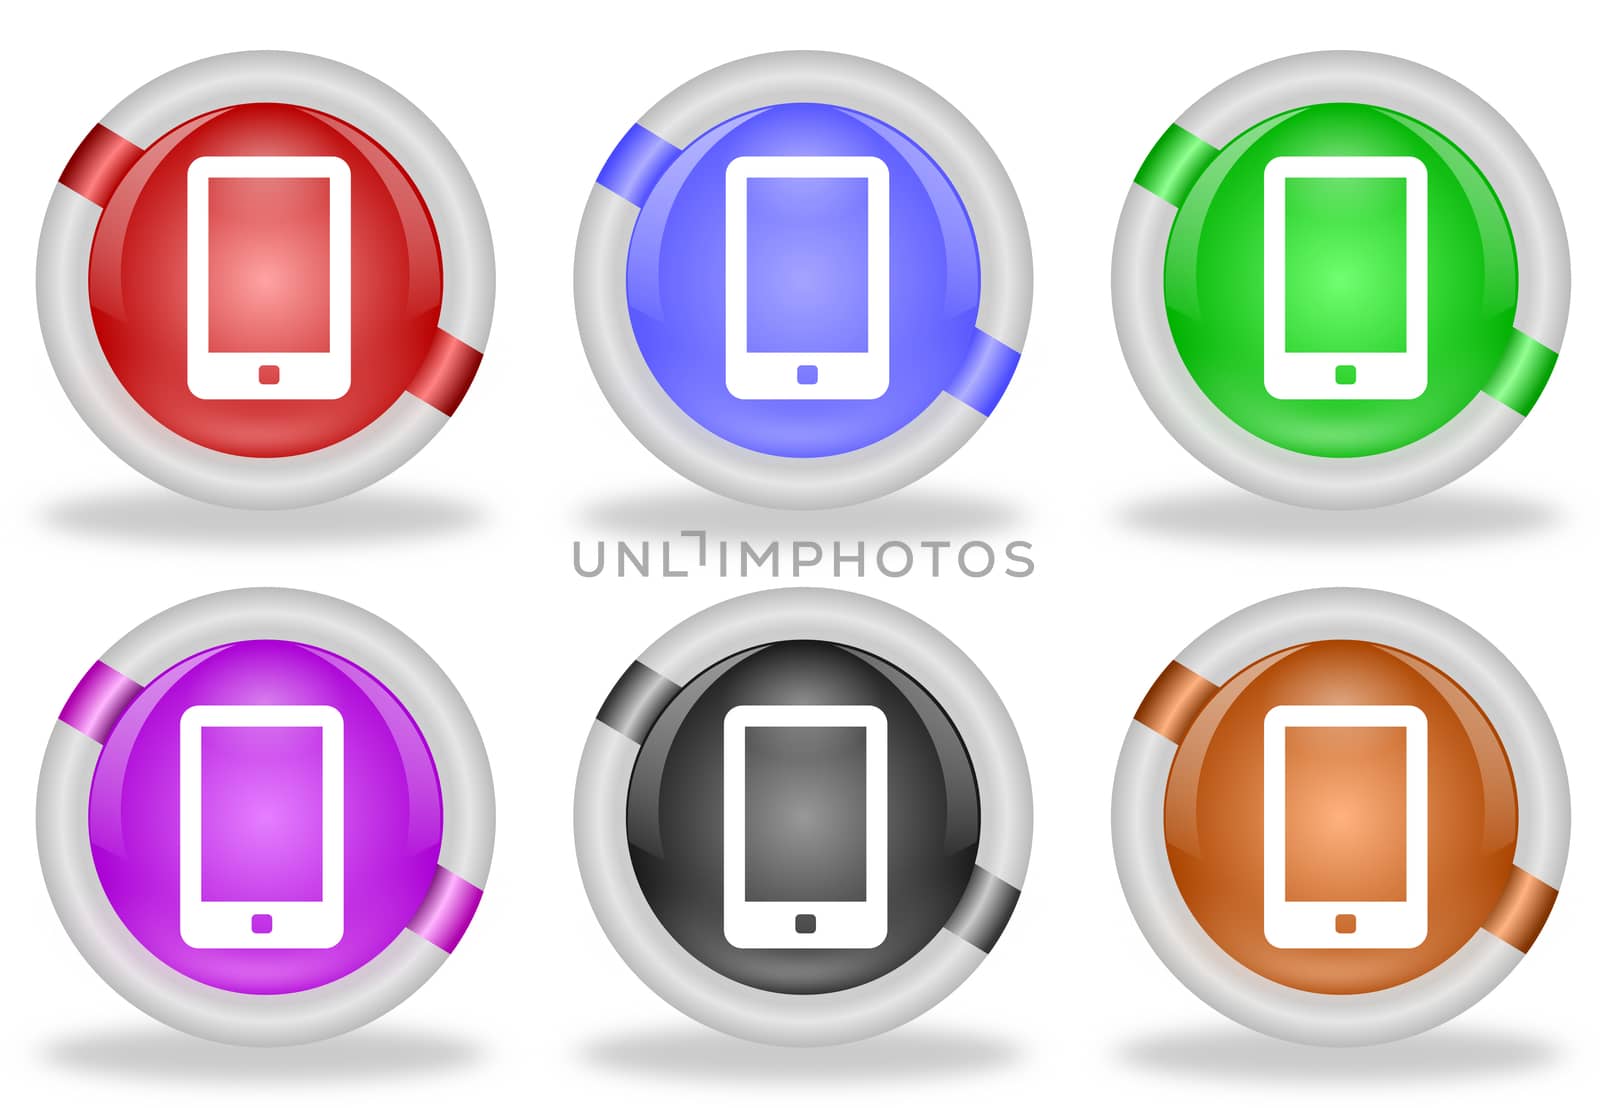 Set of  touch screen smart phone web icon buttons with beveled white rims in six pastel colors - red, blue, green, pink, black and brown
